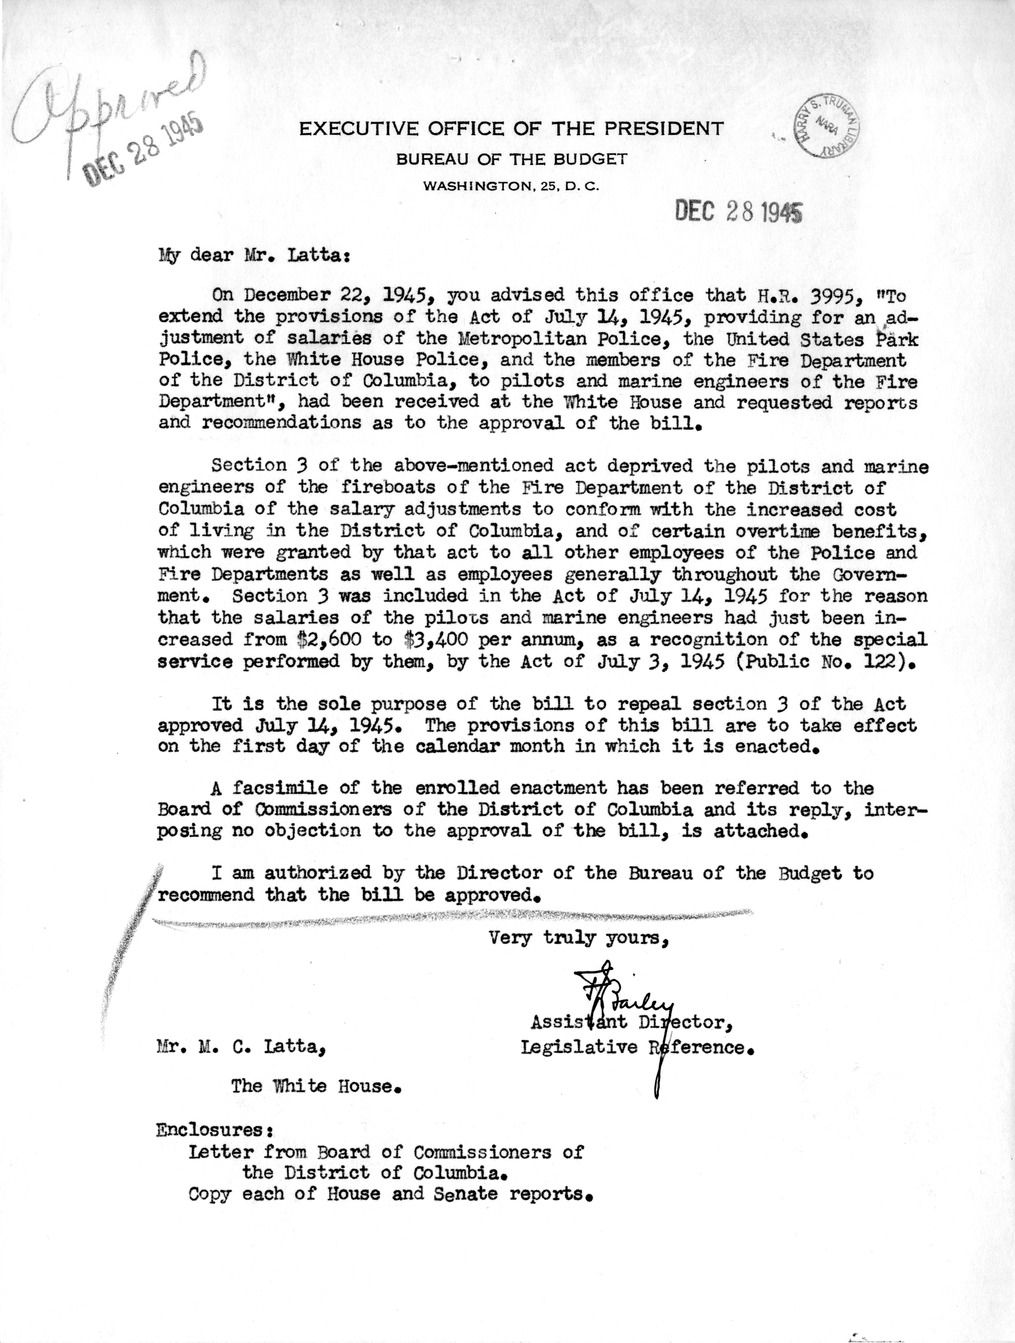 Memorandum from Frederick J. Bailey to M. C. Latta, H.R. 3995, To Extend the Provisions of the Act of July 14, 1945, Providing for an Adjustment of Salaries of the Metropolitan Police, the United States Park Police, the White House Police, and the Members of the Fire Department of the District of Columbia, to Pilots and Marine Engineers of the Fire Department, with Attachments